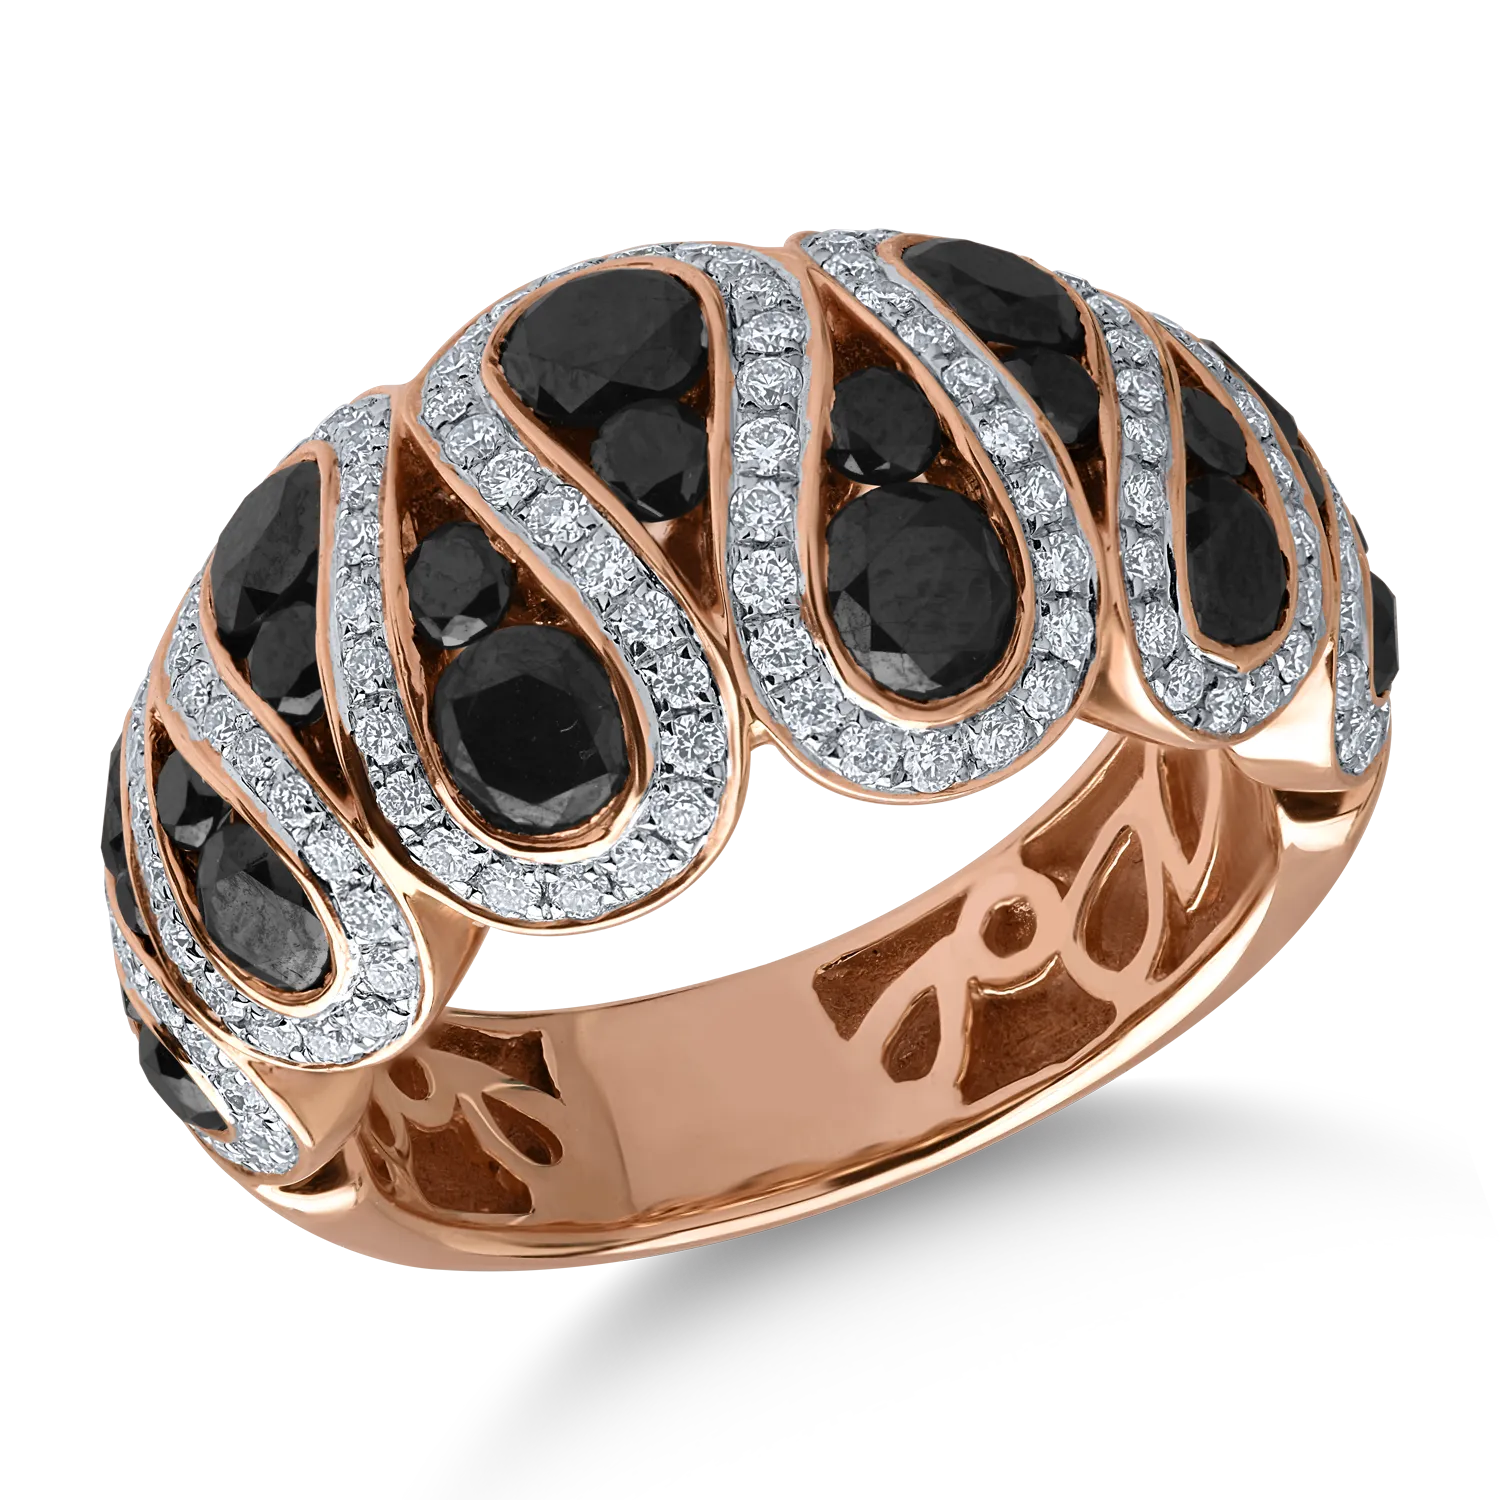 Rose gold ring with 2.43ct black diamonds and 0.63ct clear diamonds